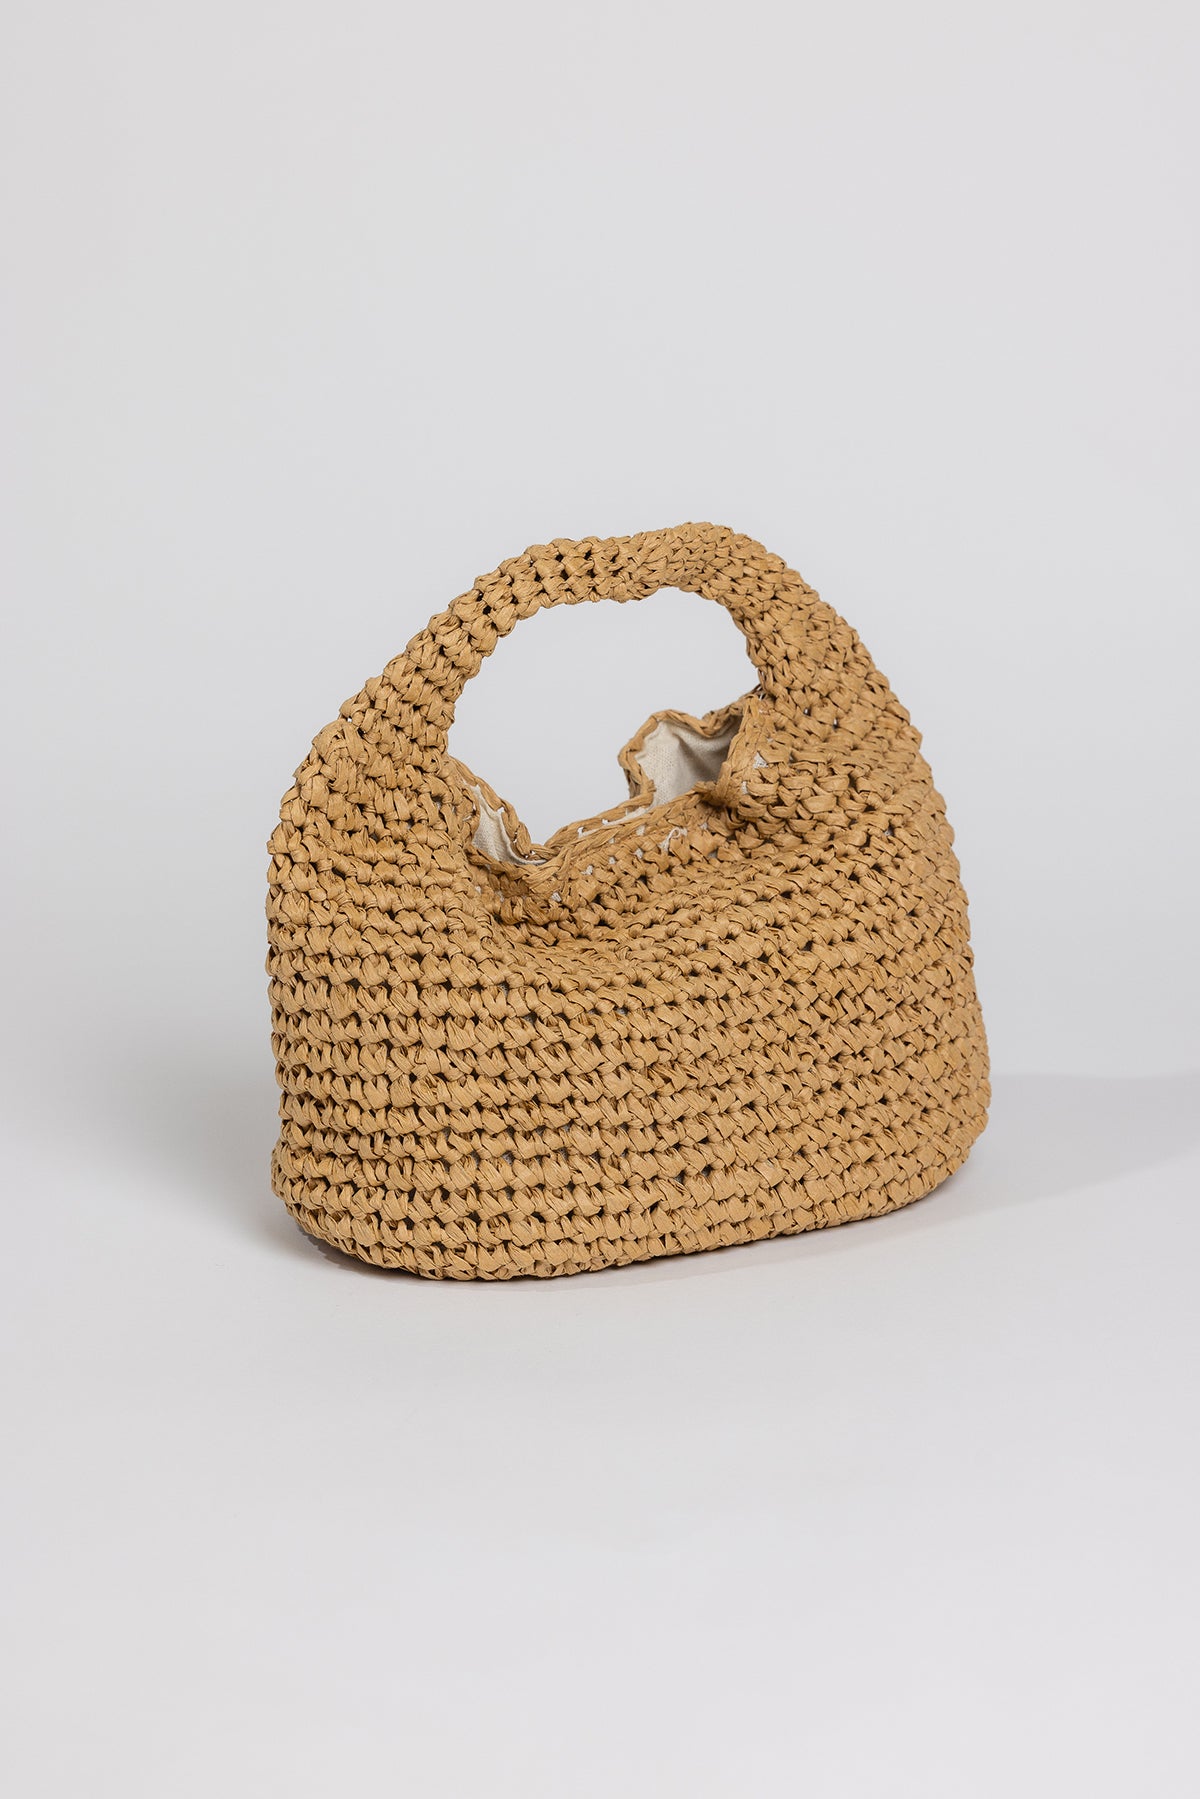 Woven paper straw slouch bag with a single handle, featuring a natural beige color and a soft inner lining, set against a light gray background by Velvet by Graham & Spencer.-26047812731073